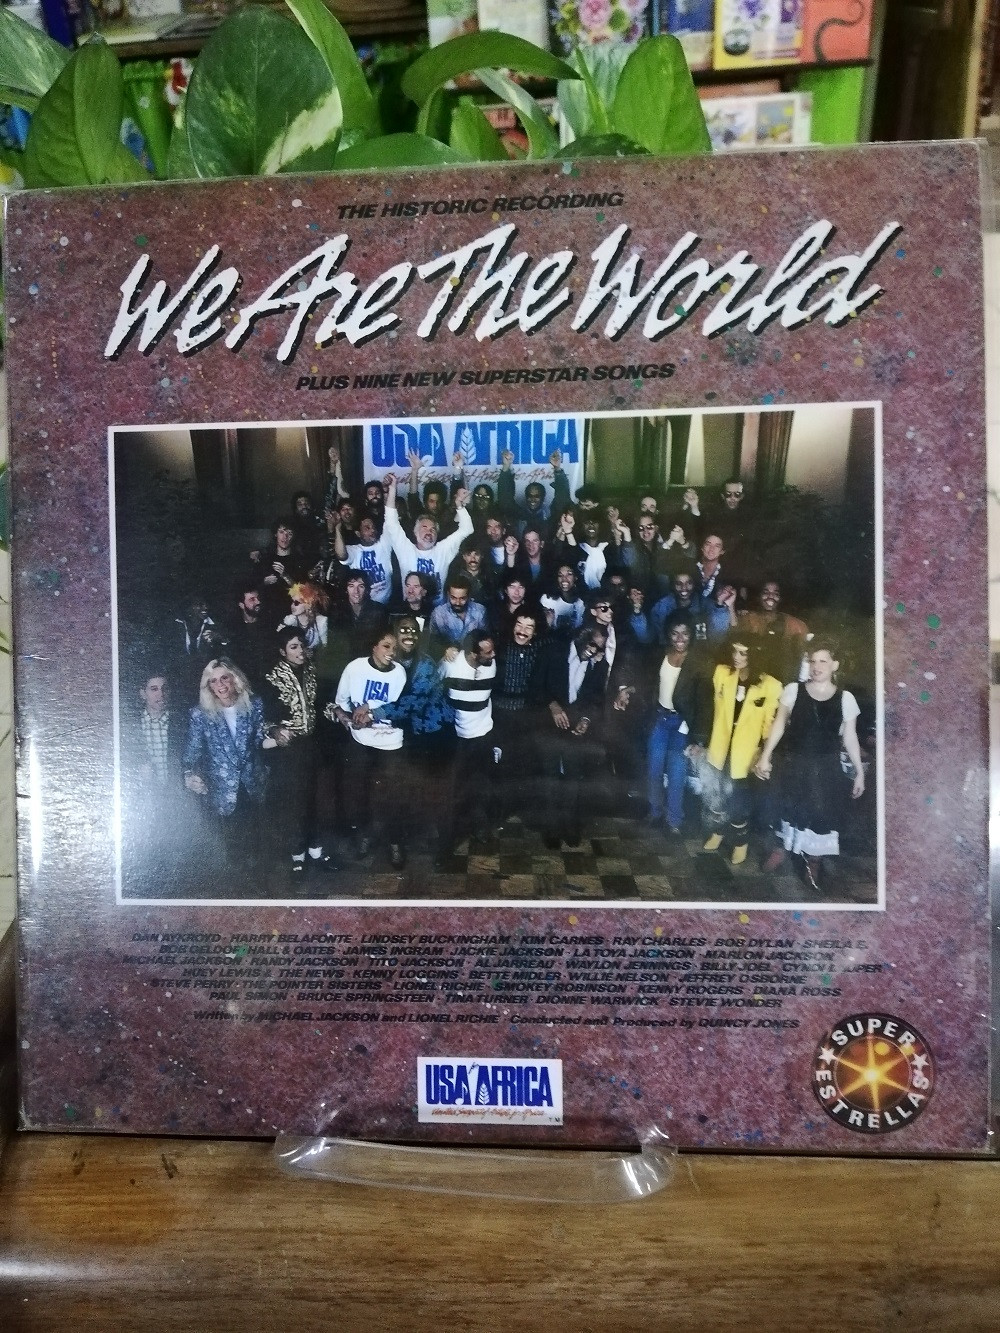 Imagen LP WE ARE THE WORLD - THE HISTORY RECORDING - PLUS NINE NEW SUPERSTAR SONGS 1